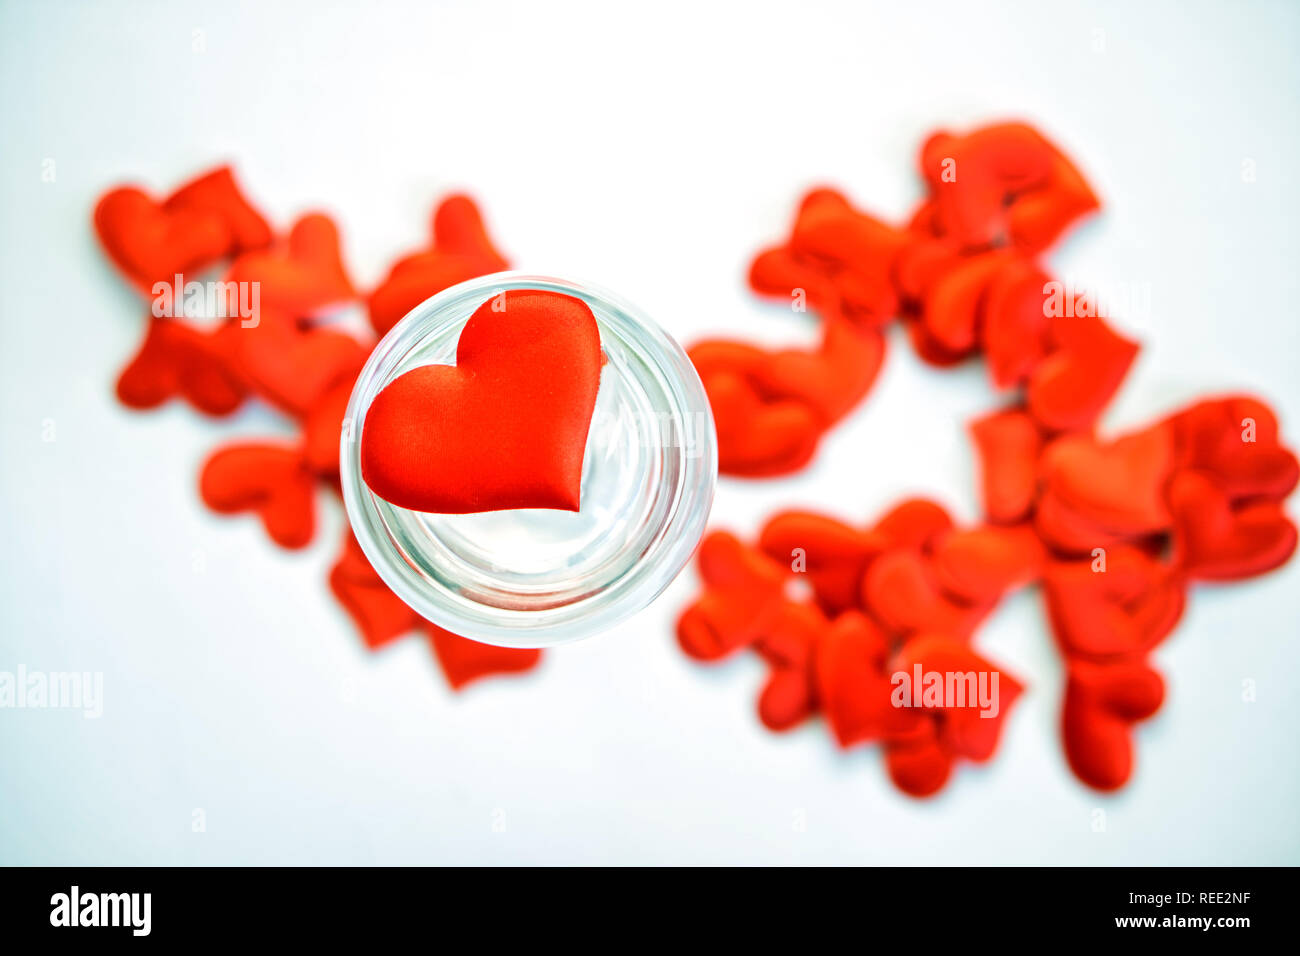 Red heart in a transparent glass. St. Valentine's Day. Congratulations on Valentine's Day. Stock Photo